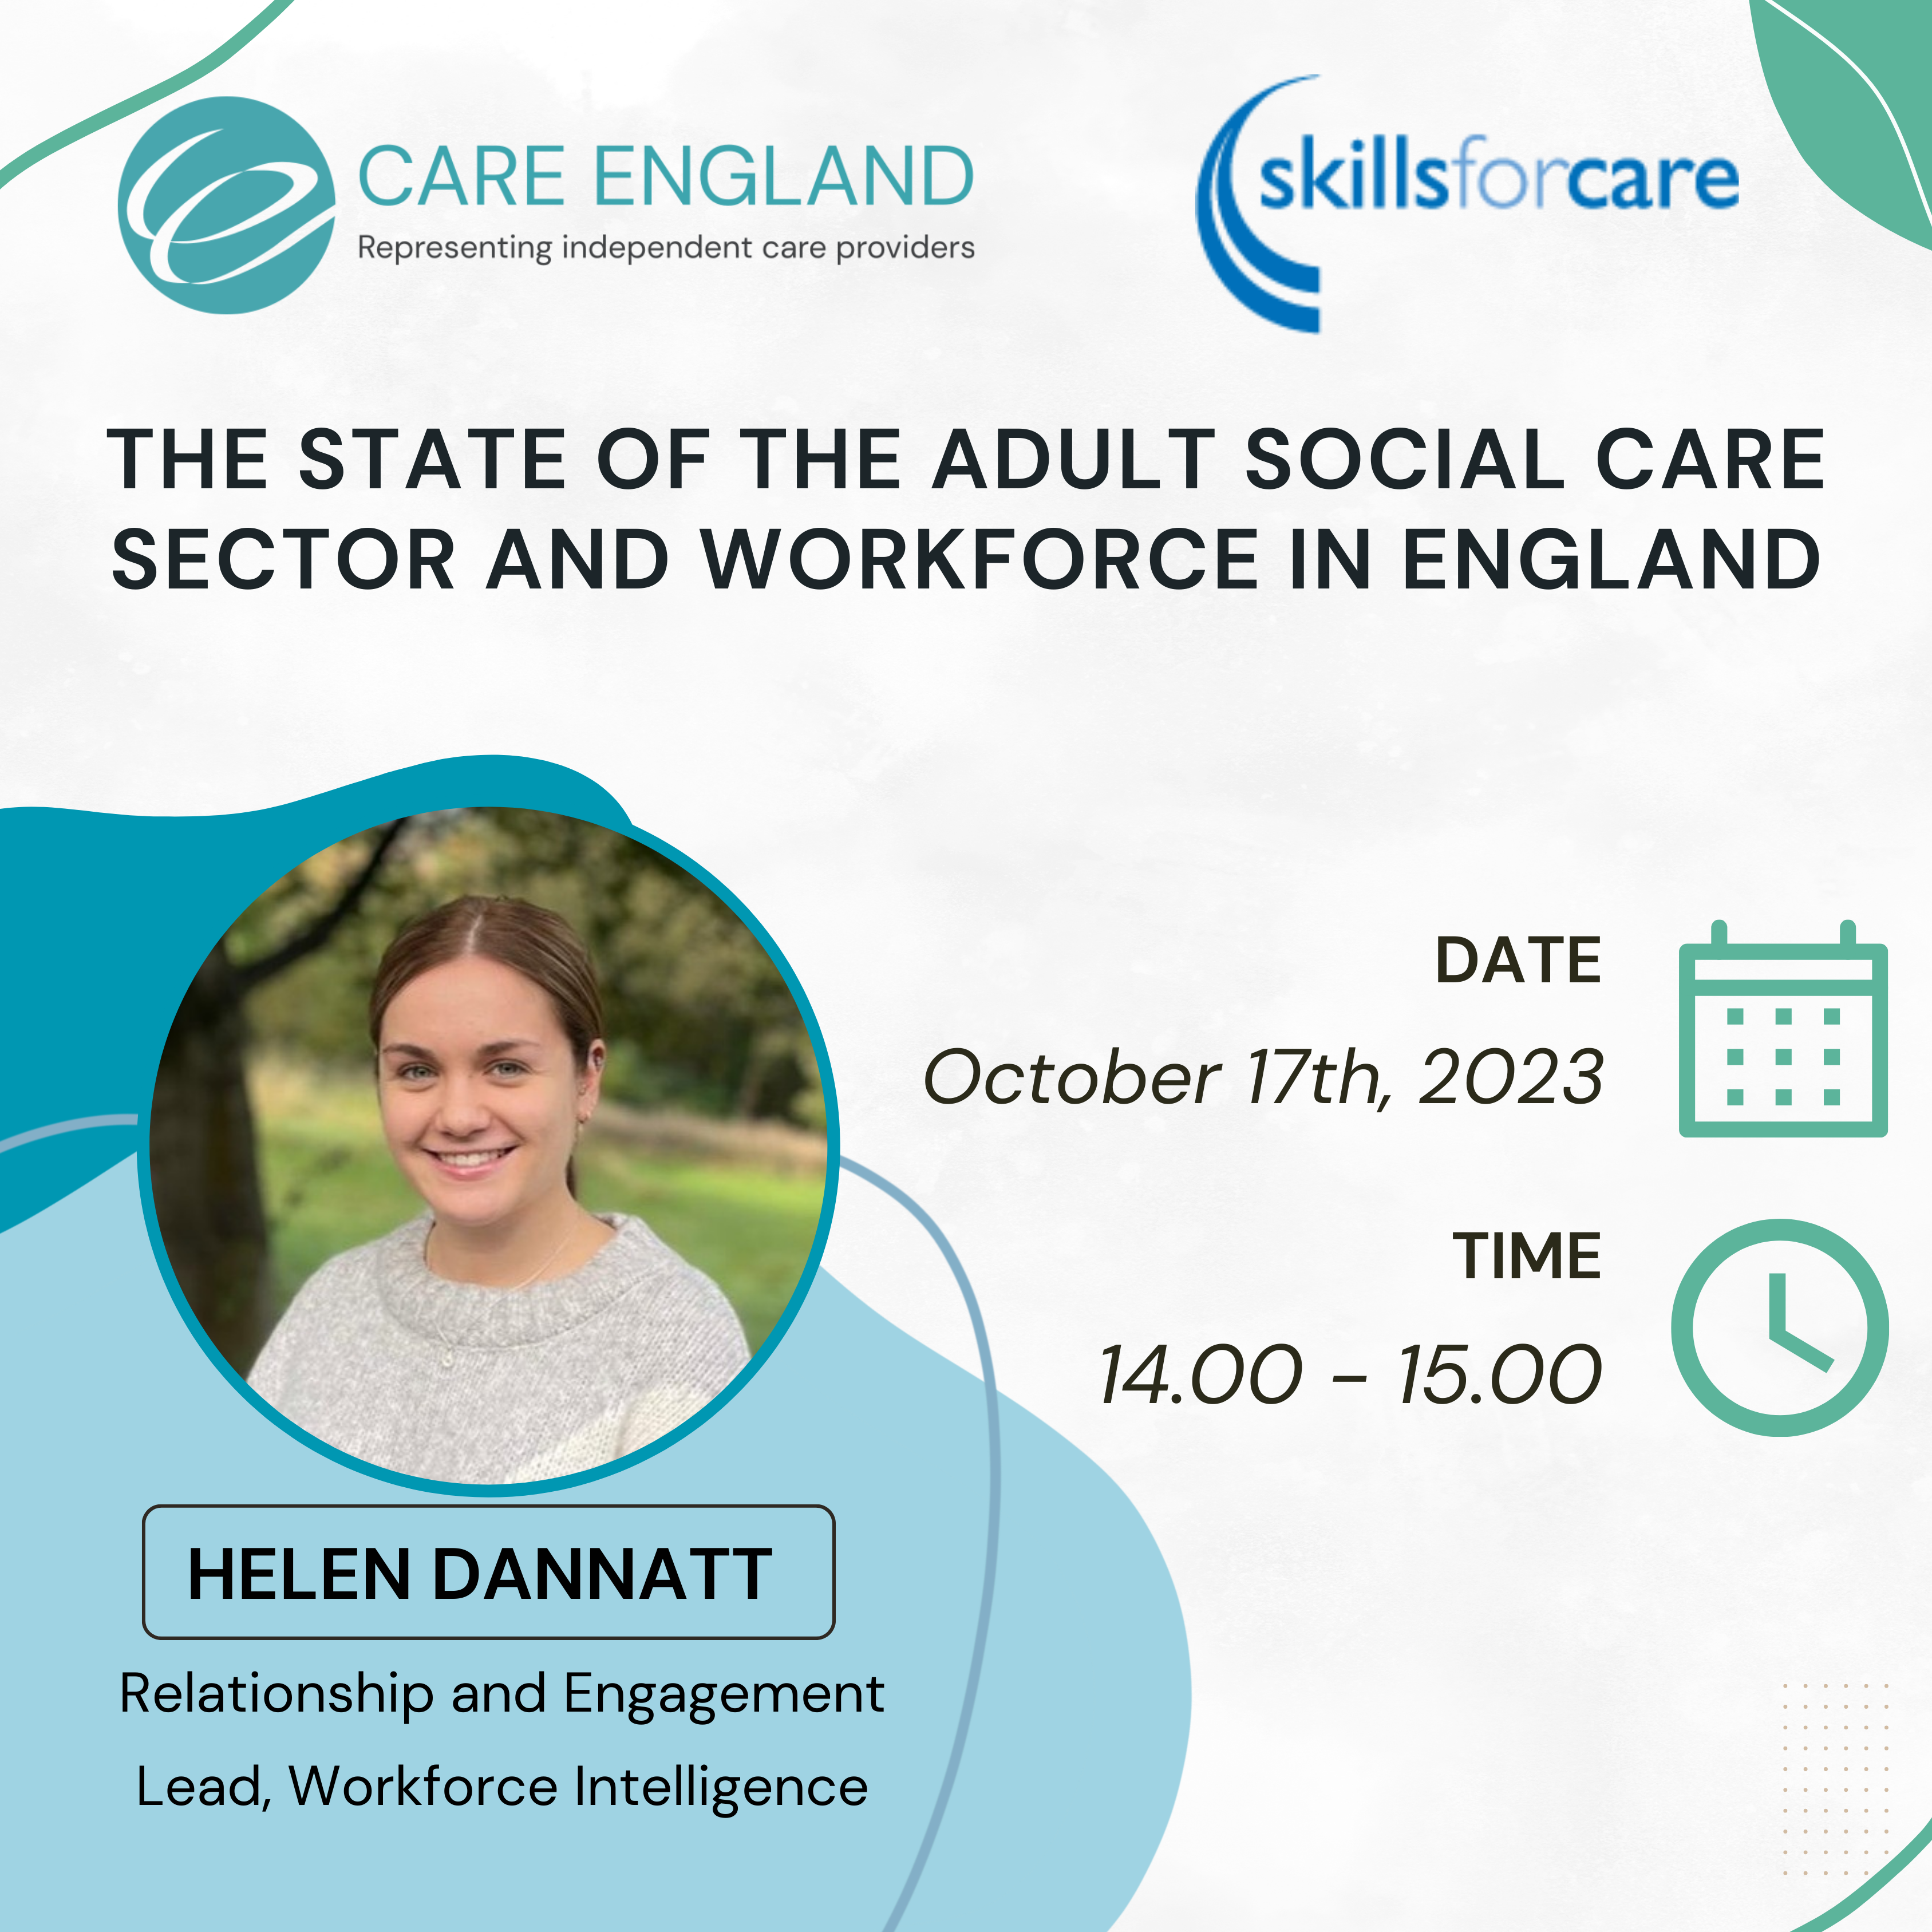 Skills for Care: The state of the adult social care sector and workforce in England